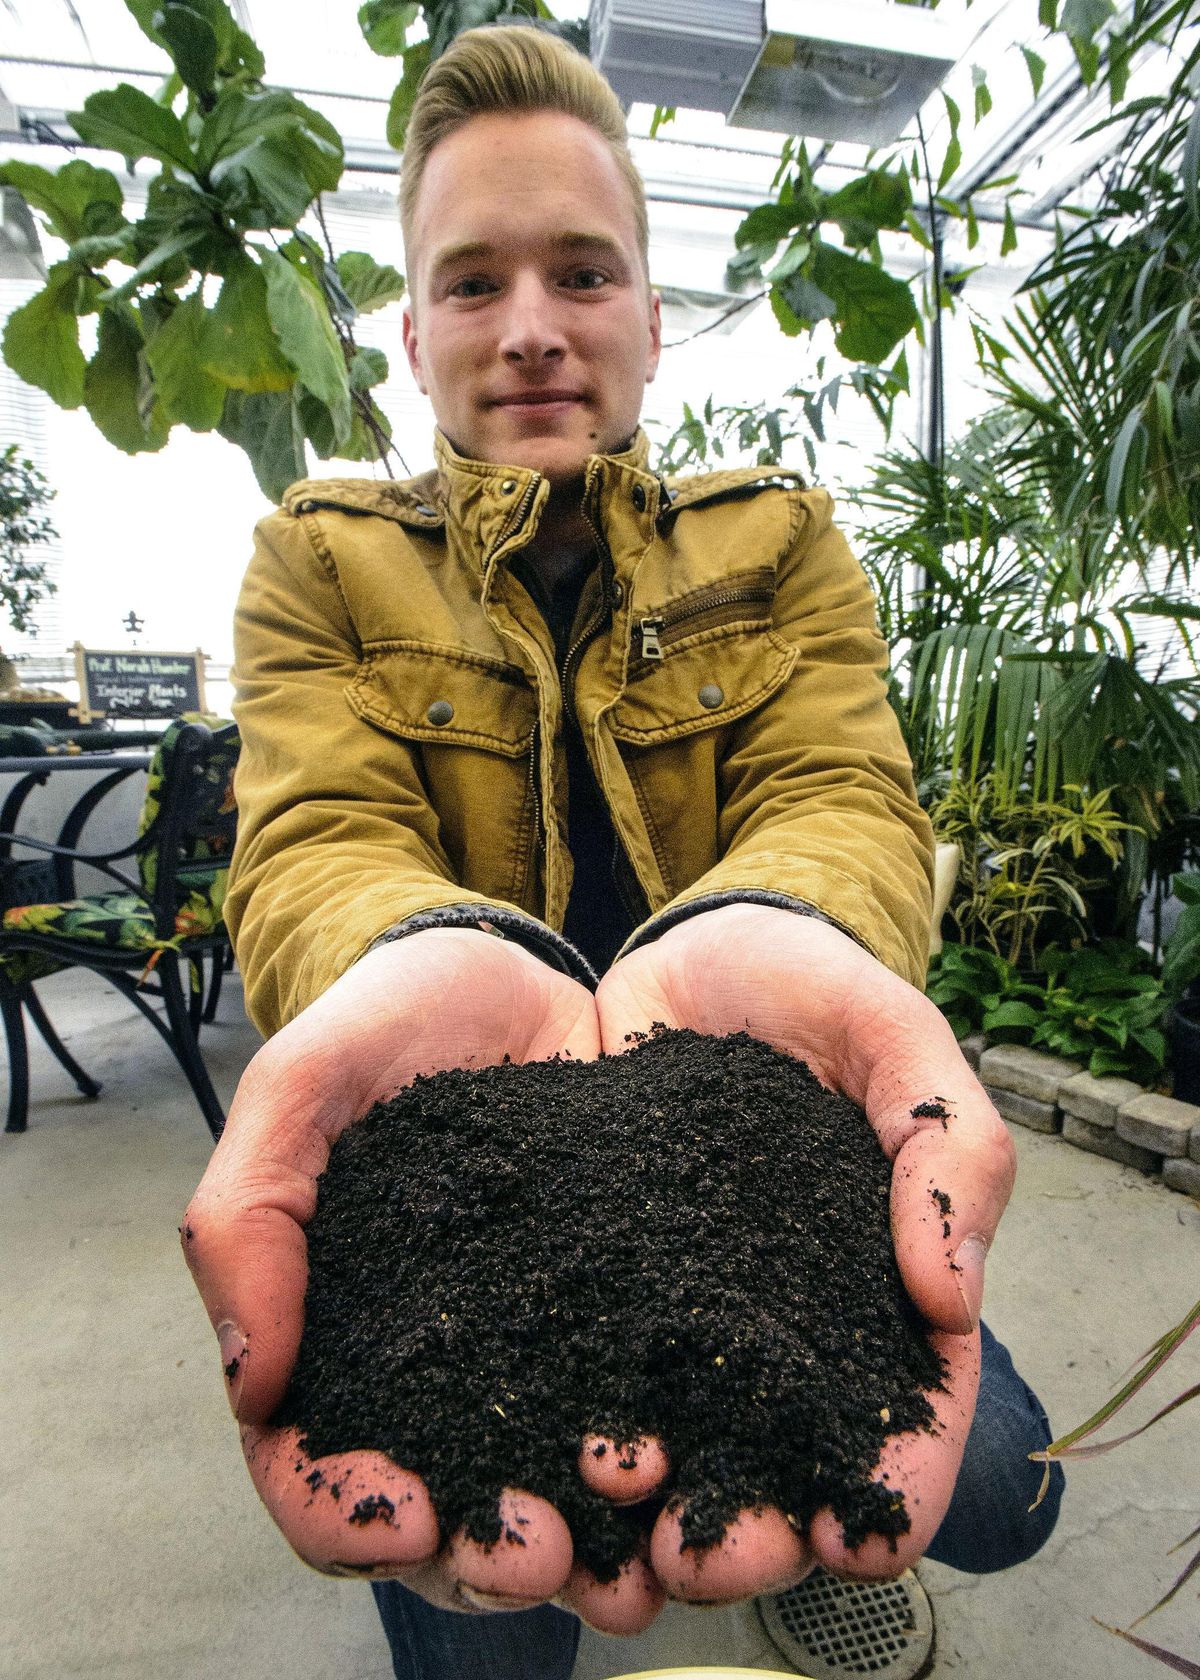 BYU student Joseph Walker was named the winner of the 2017 Utah Regional Global Student Entrepreneur Awards (GSEA) with his company, OmniEarth, an organic fertilizer company based out of Provo, Utah. A sample is pictured here. (Steve Griffin / Associated Press)